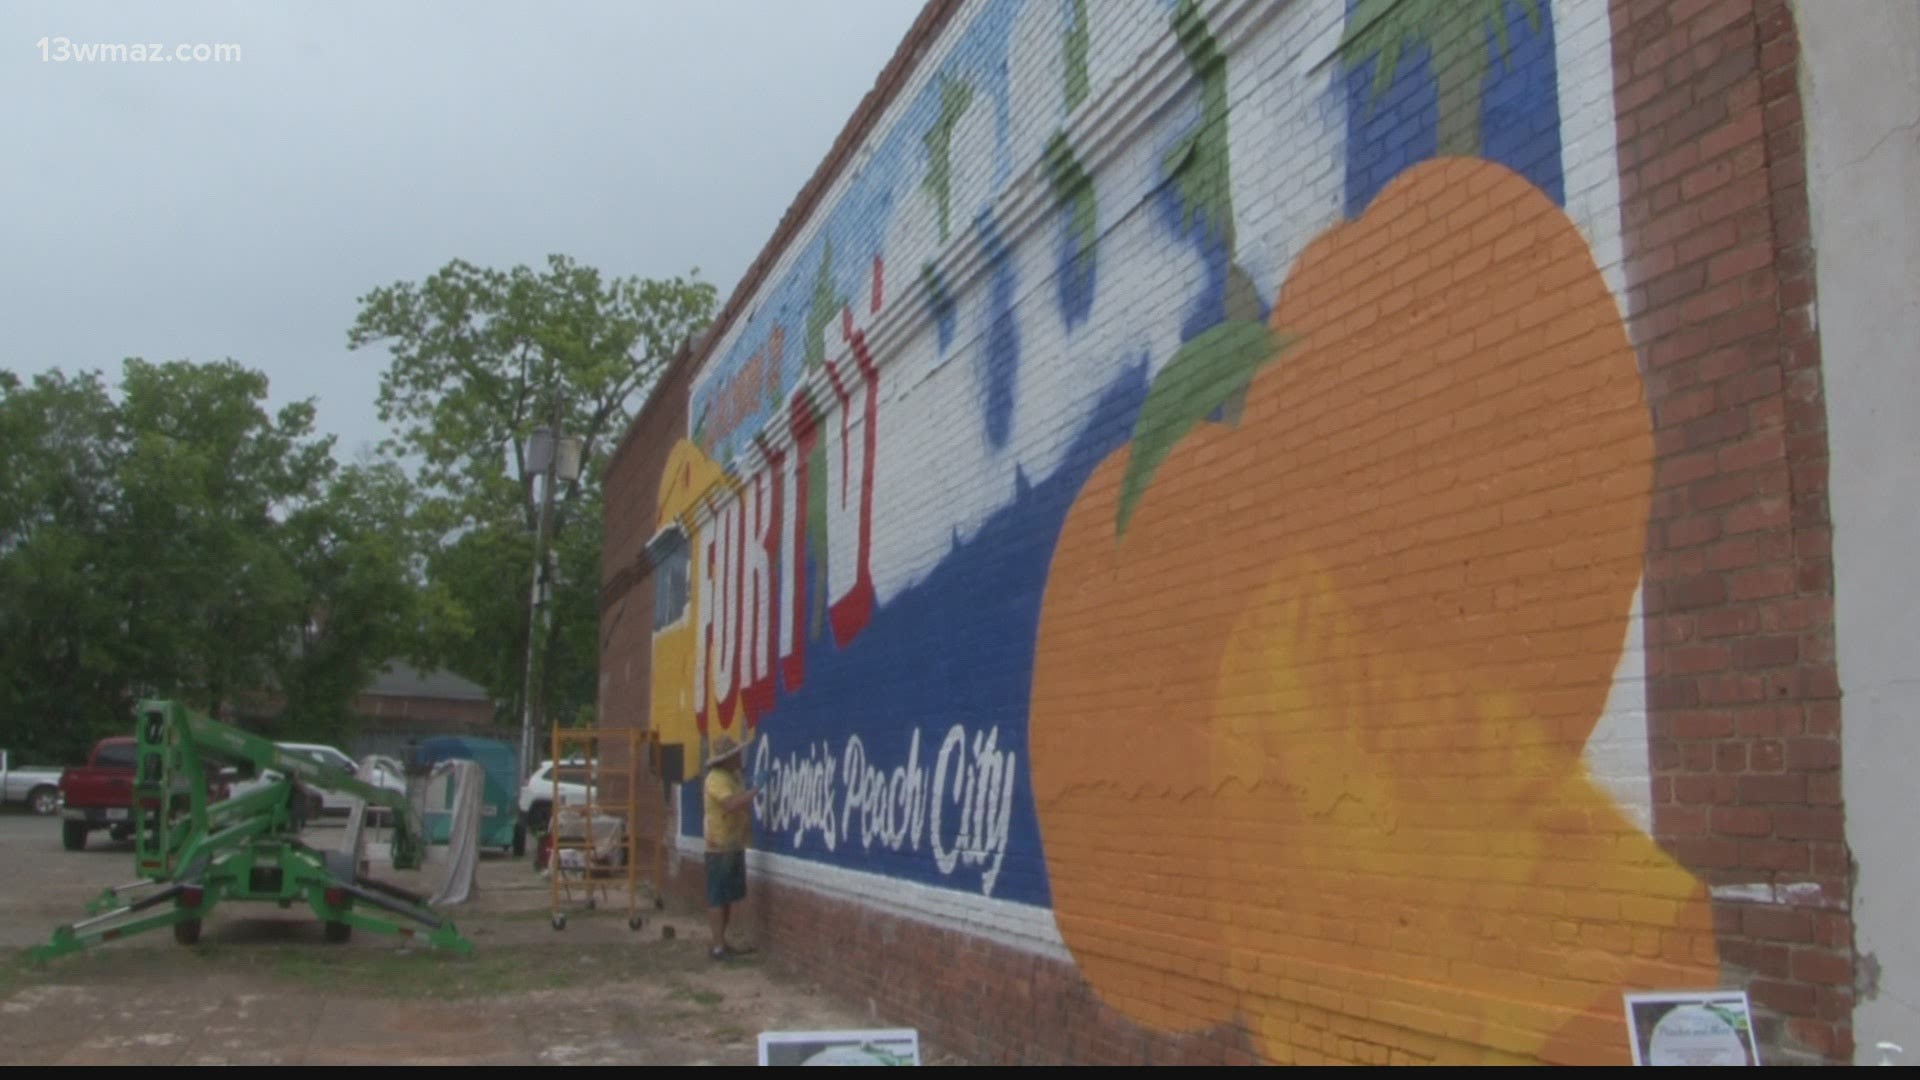 Folks in Fort Valley will be seeing some new artwork in town. The city and Flint Energy have joined forces to fund a mural on South Camellia Boulevard.